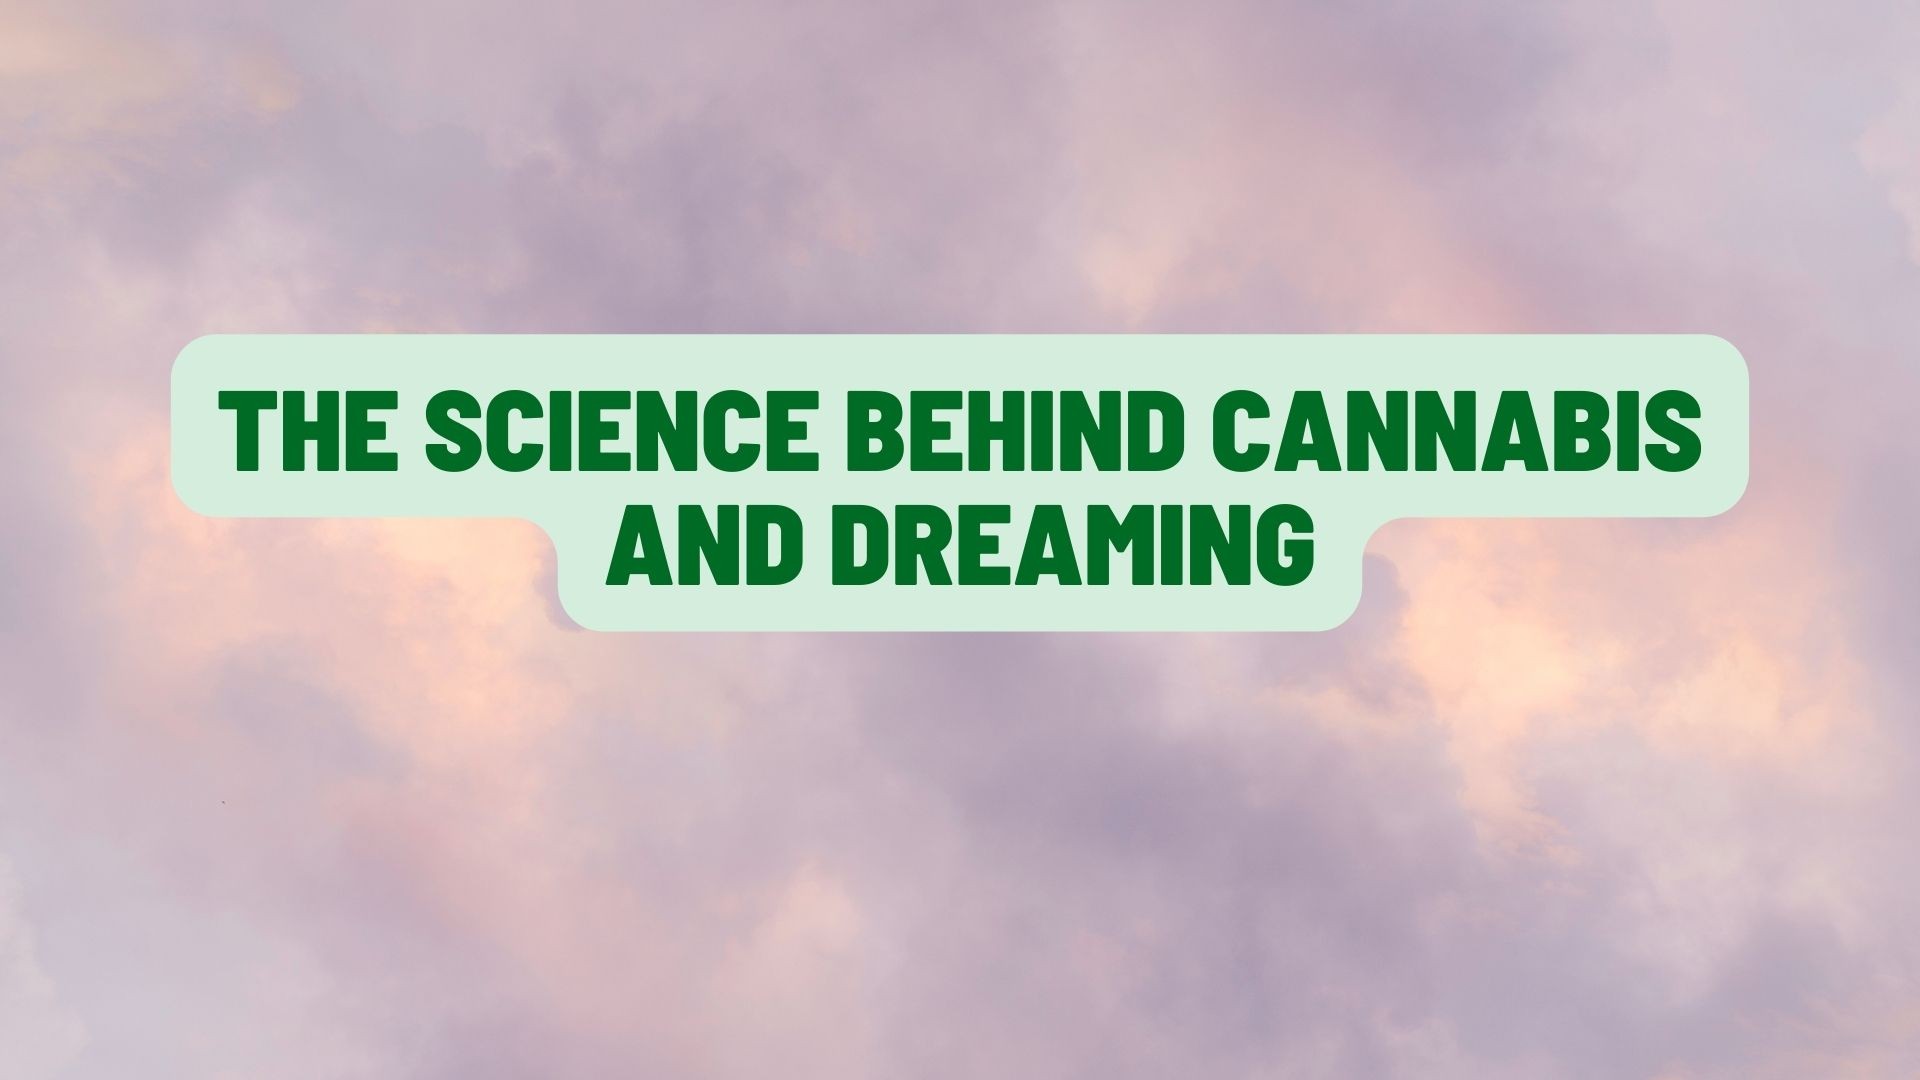 The Science Behind Cannabis and Dreaming